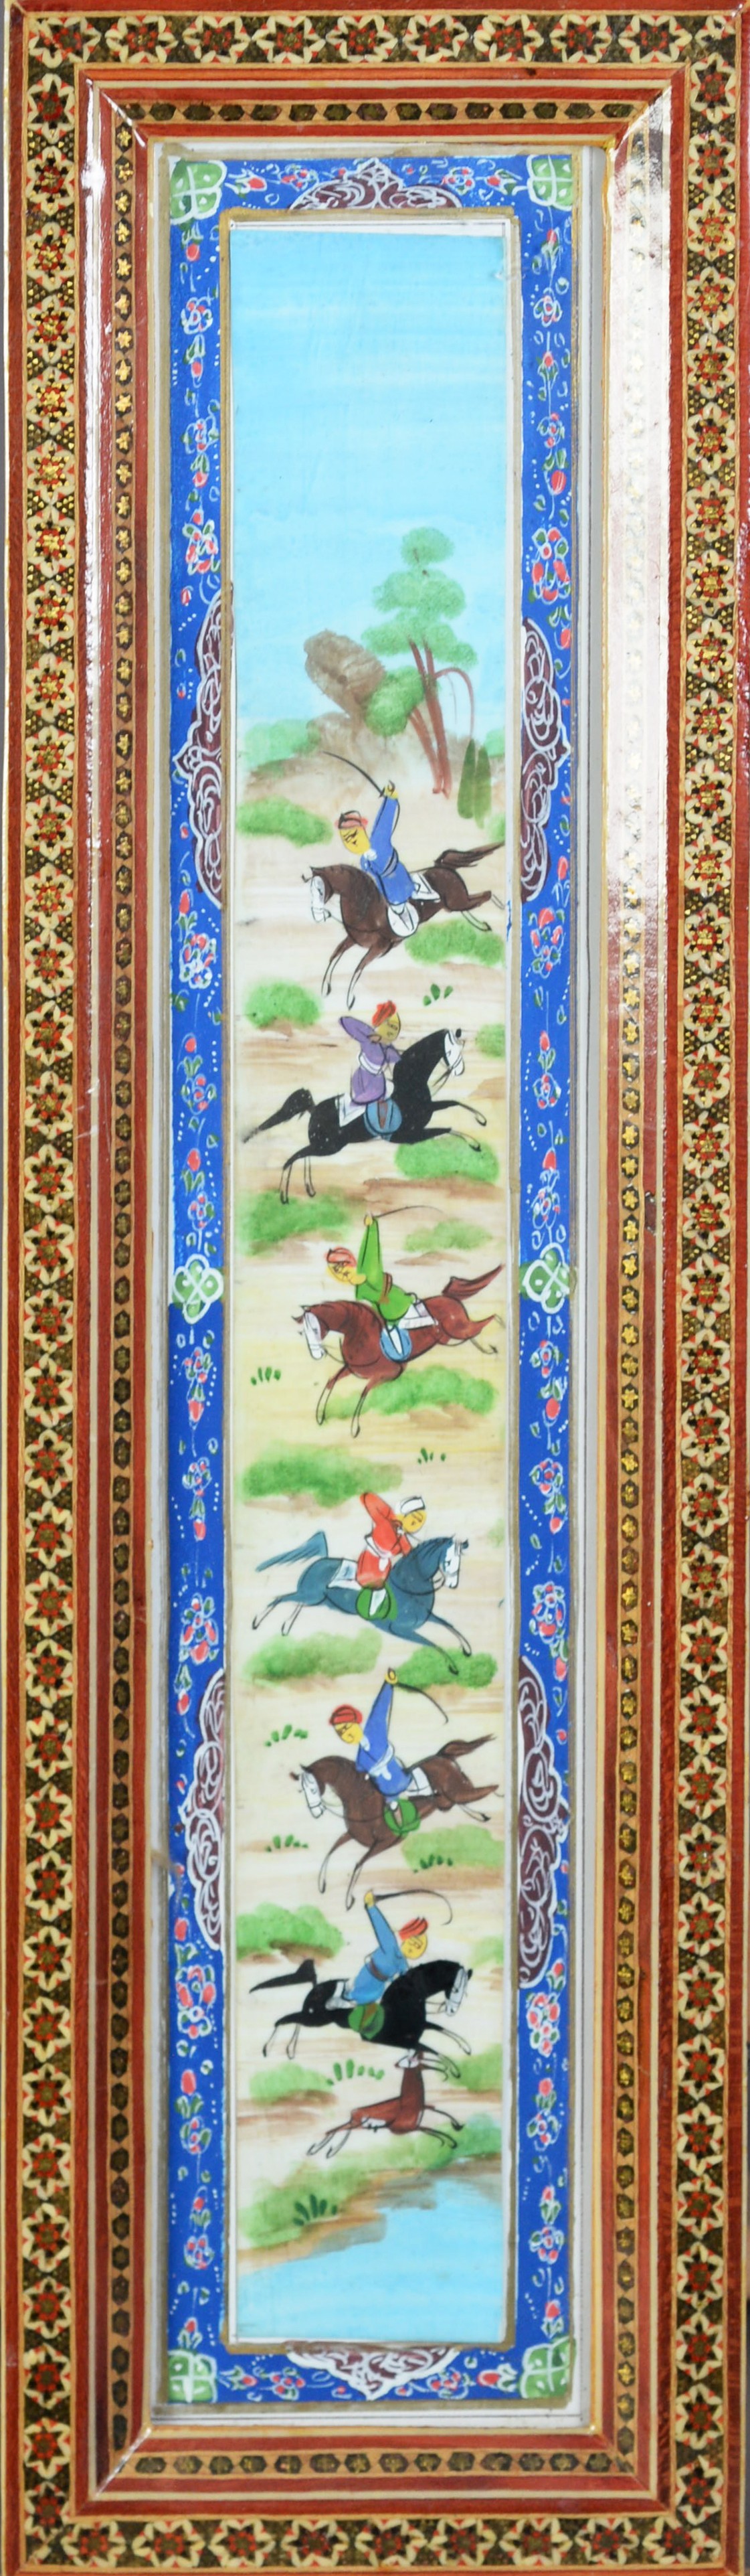 PAIR OF INDIAN GOUACHE DRAWINGS ON PAPER, EACH OF TWO WARRIORS, ONE ON HORSEBACK, within embroidered - Image 8 of 8